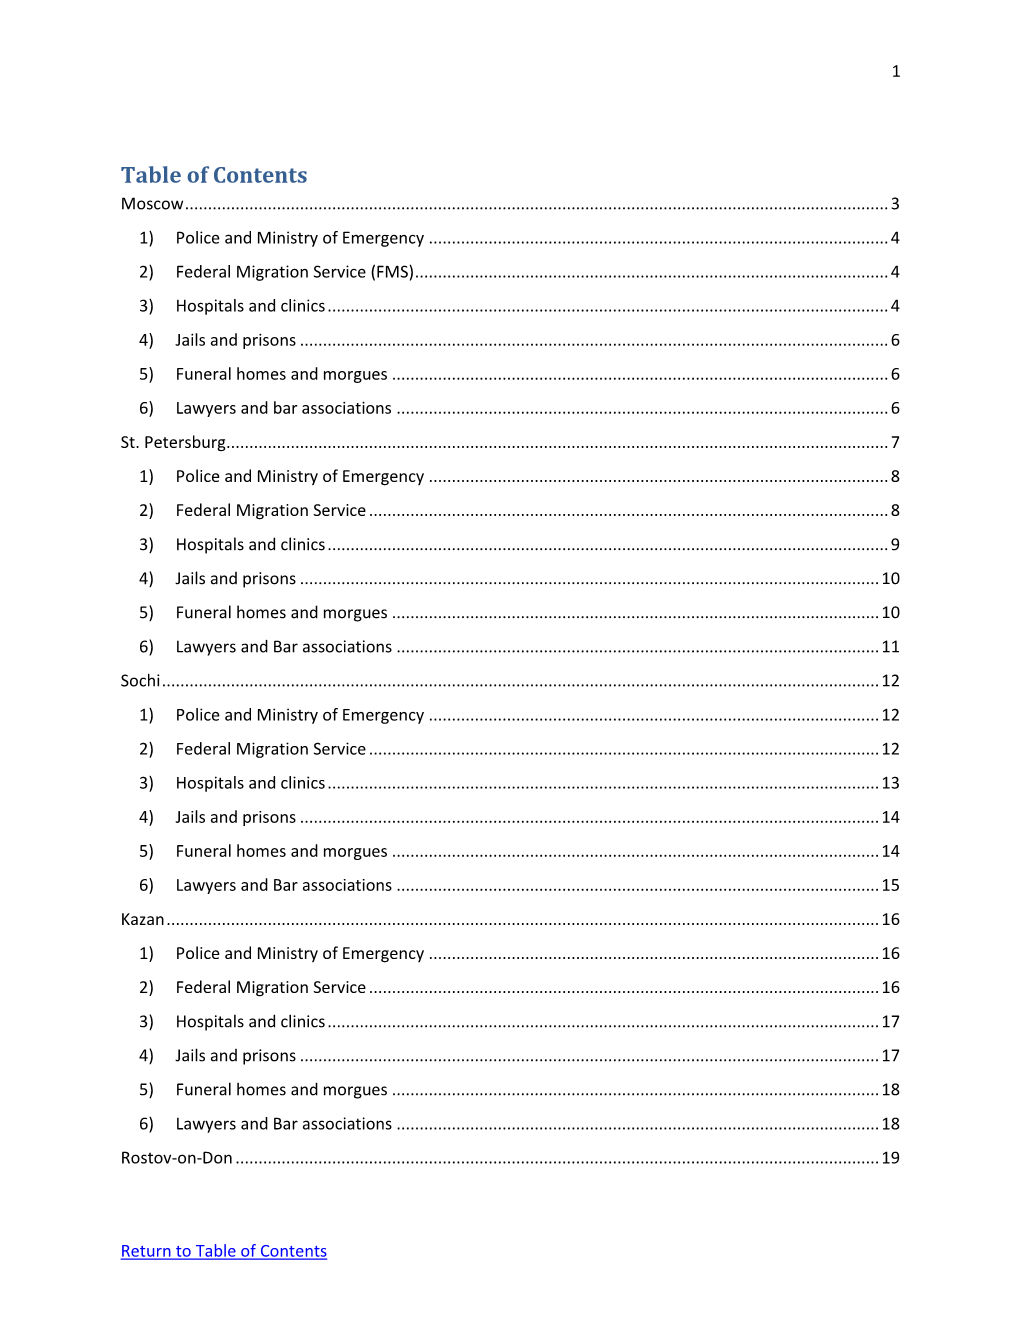 Table of Contents Moscow